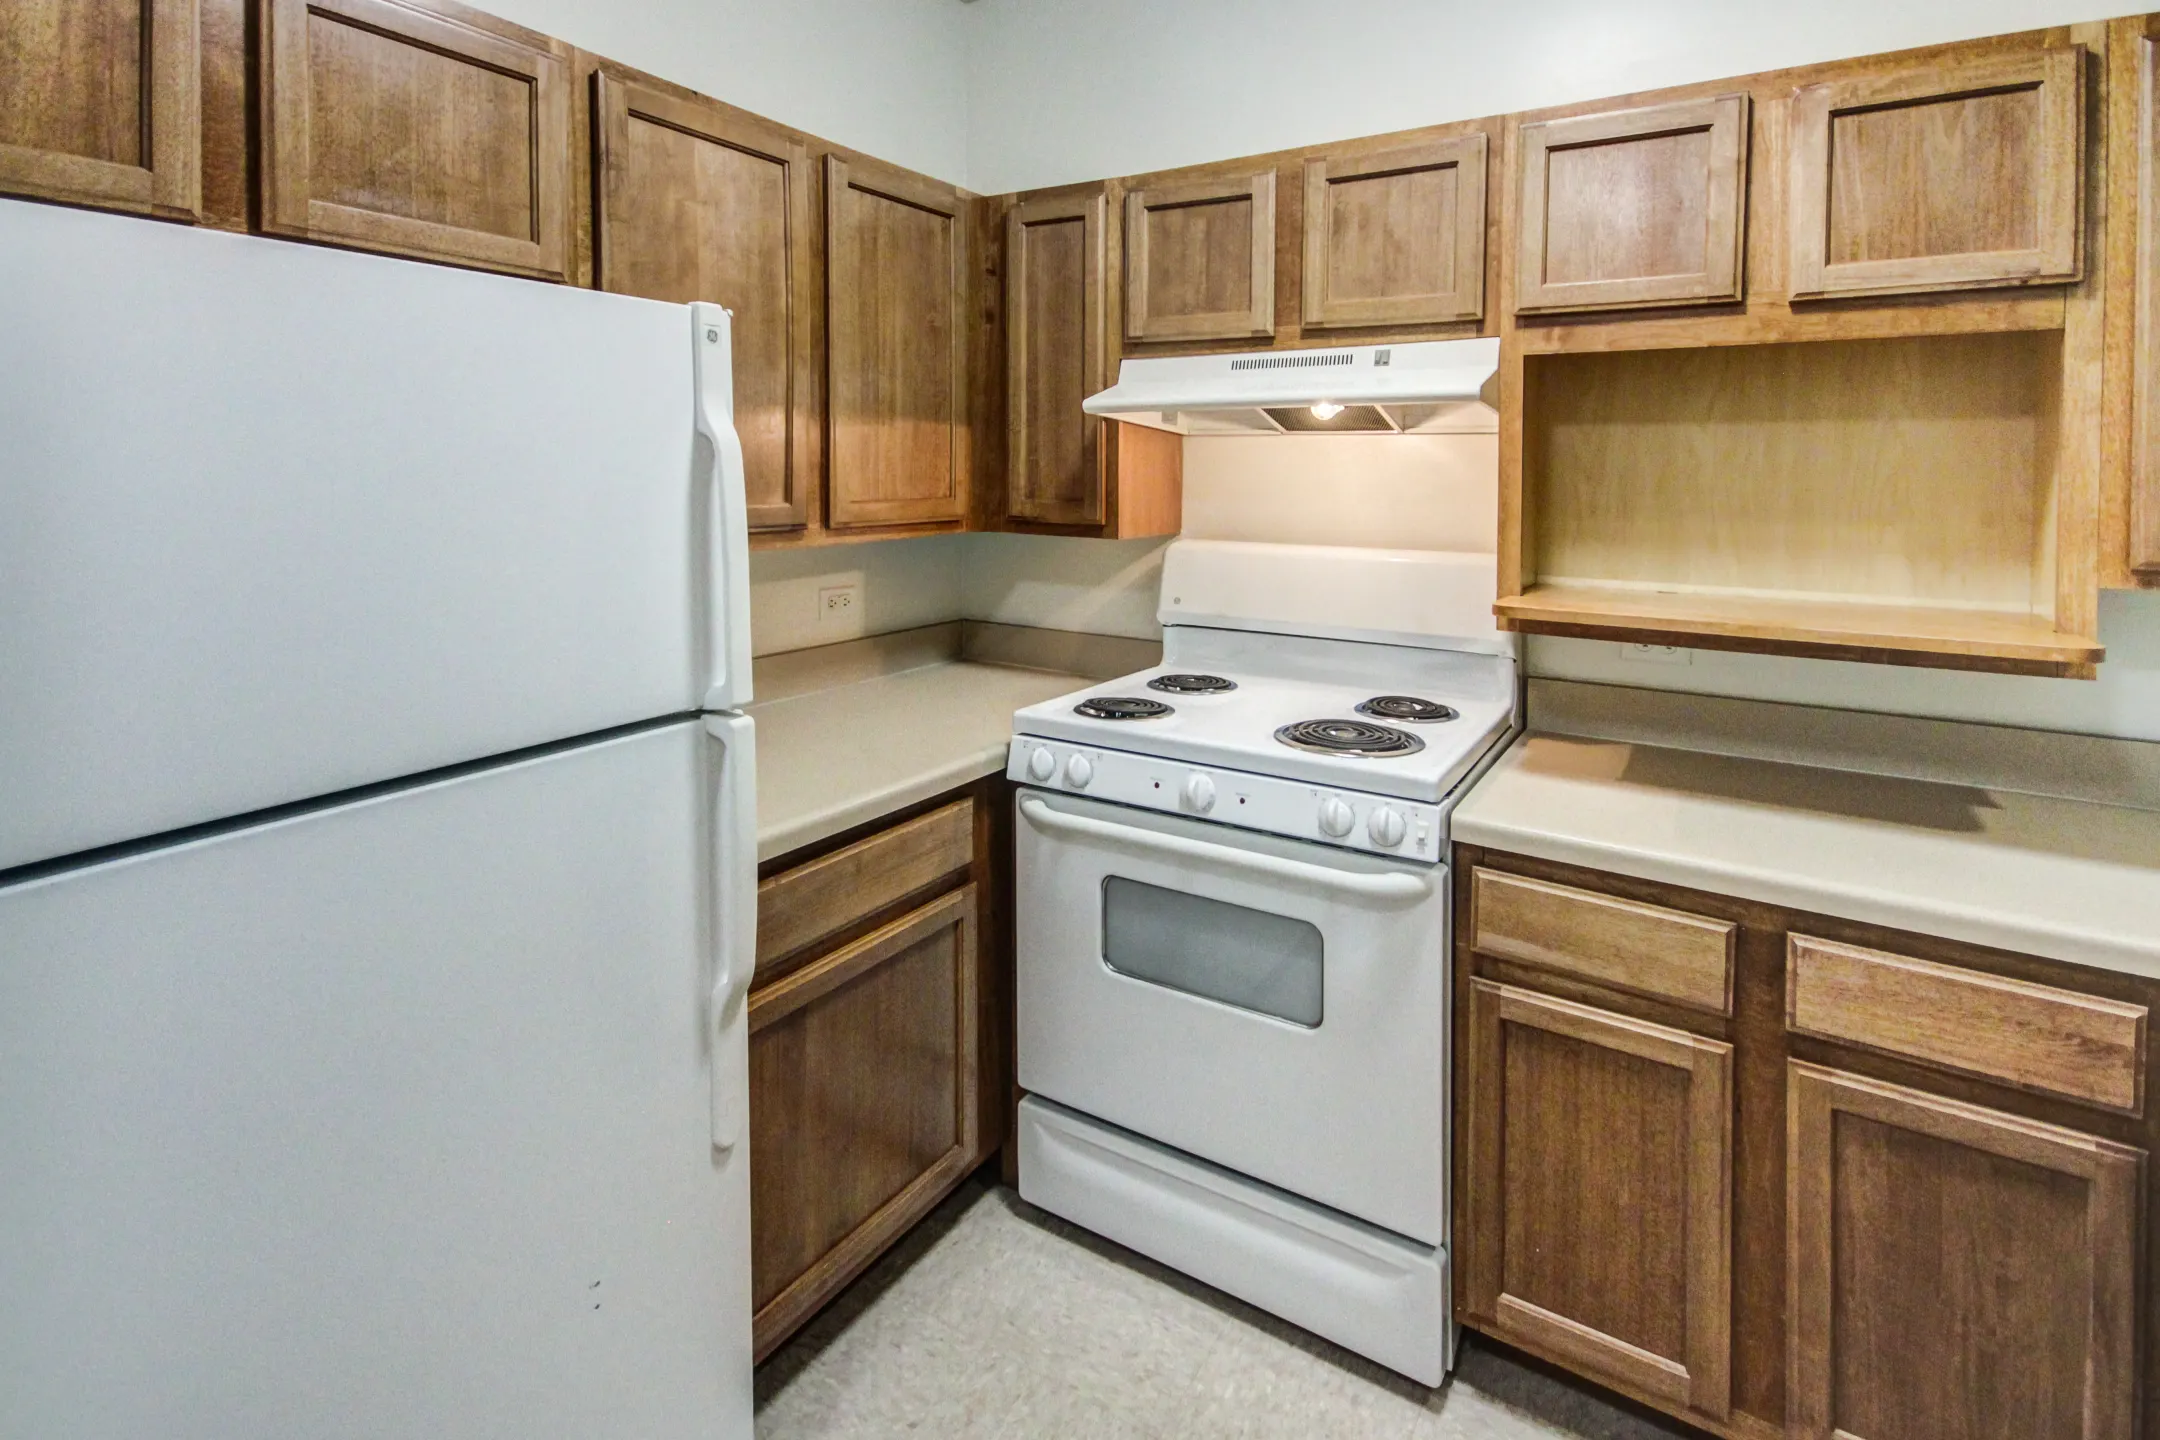 Kitchen - Residence At Carriage Creek - Richton Park, IL